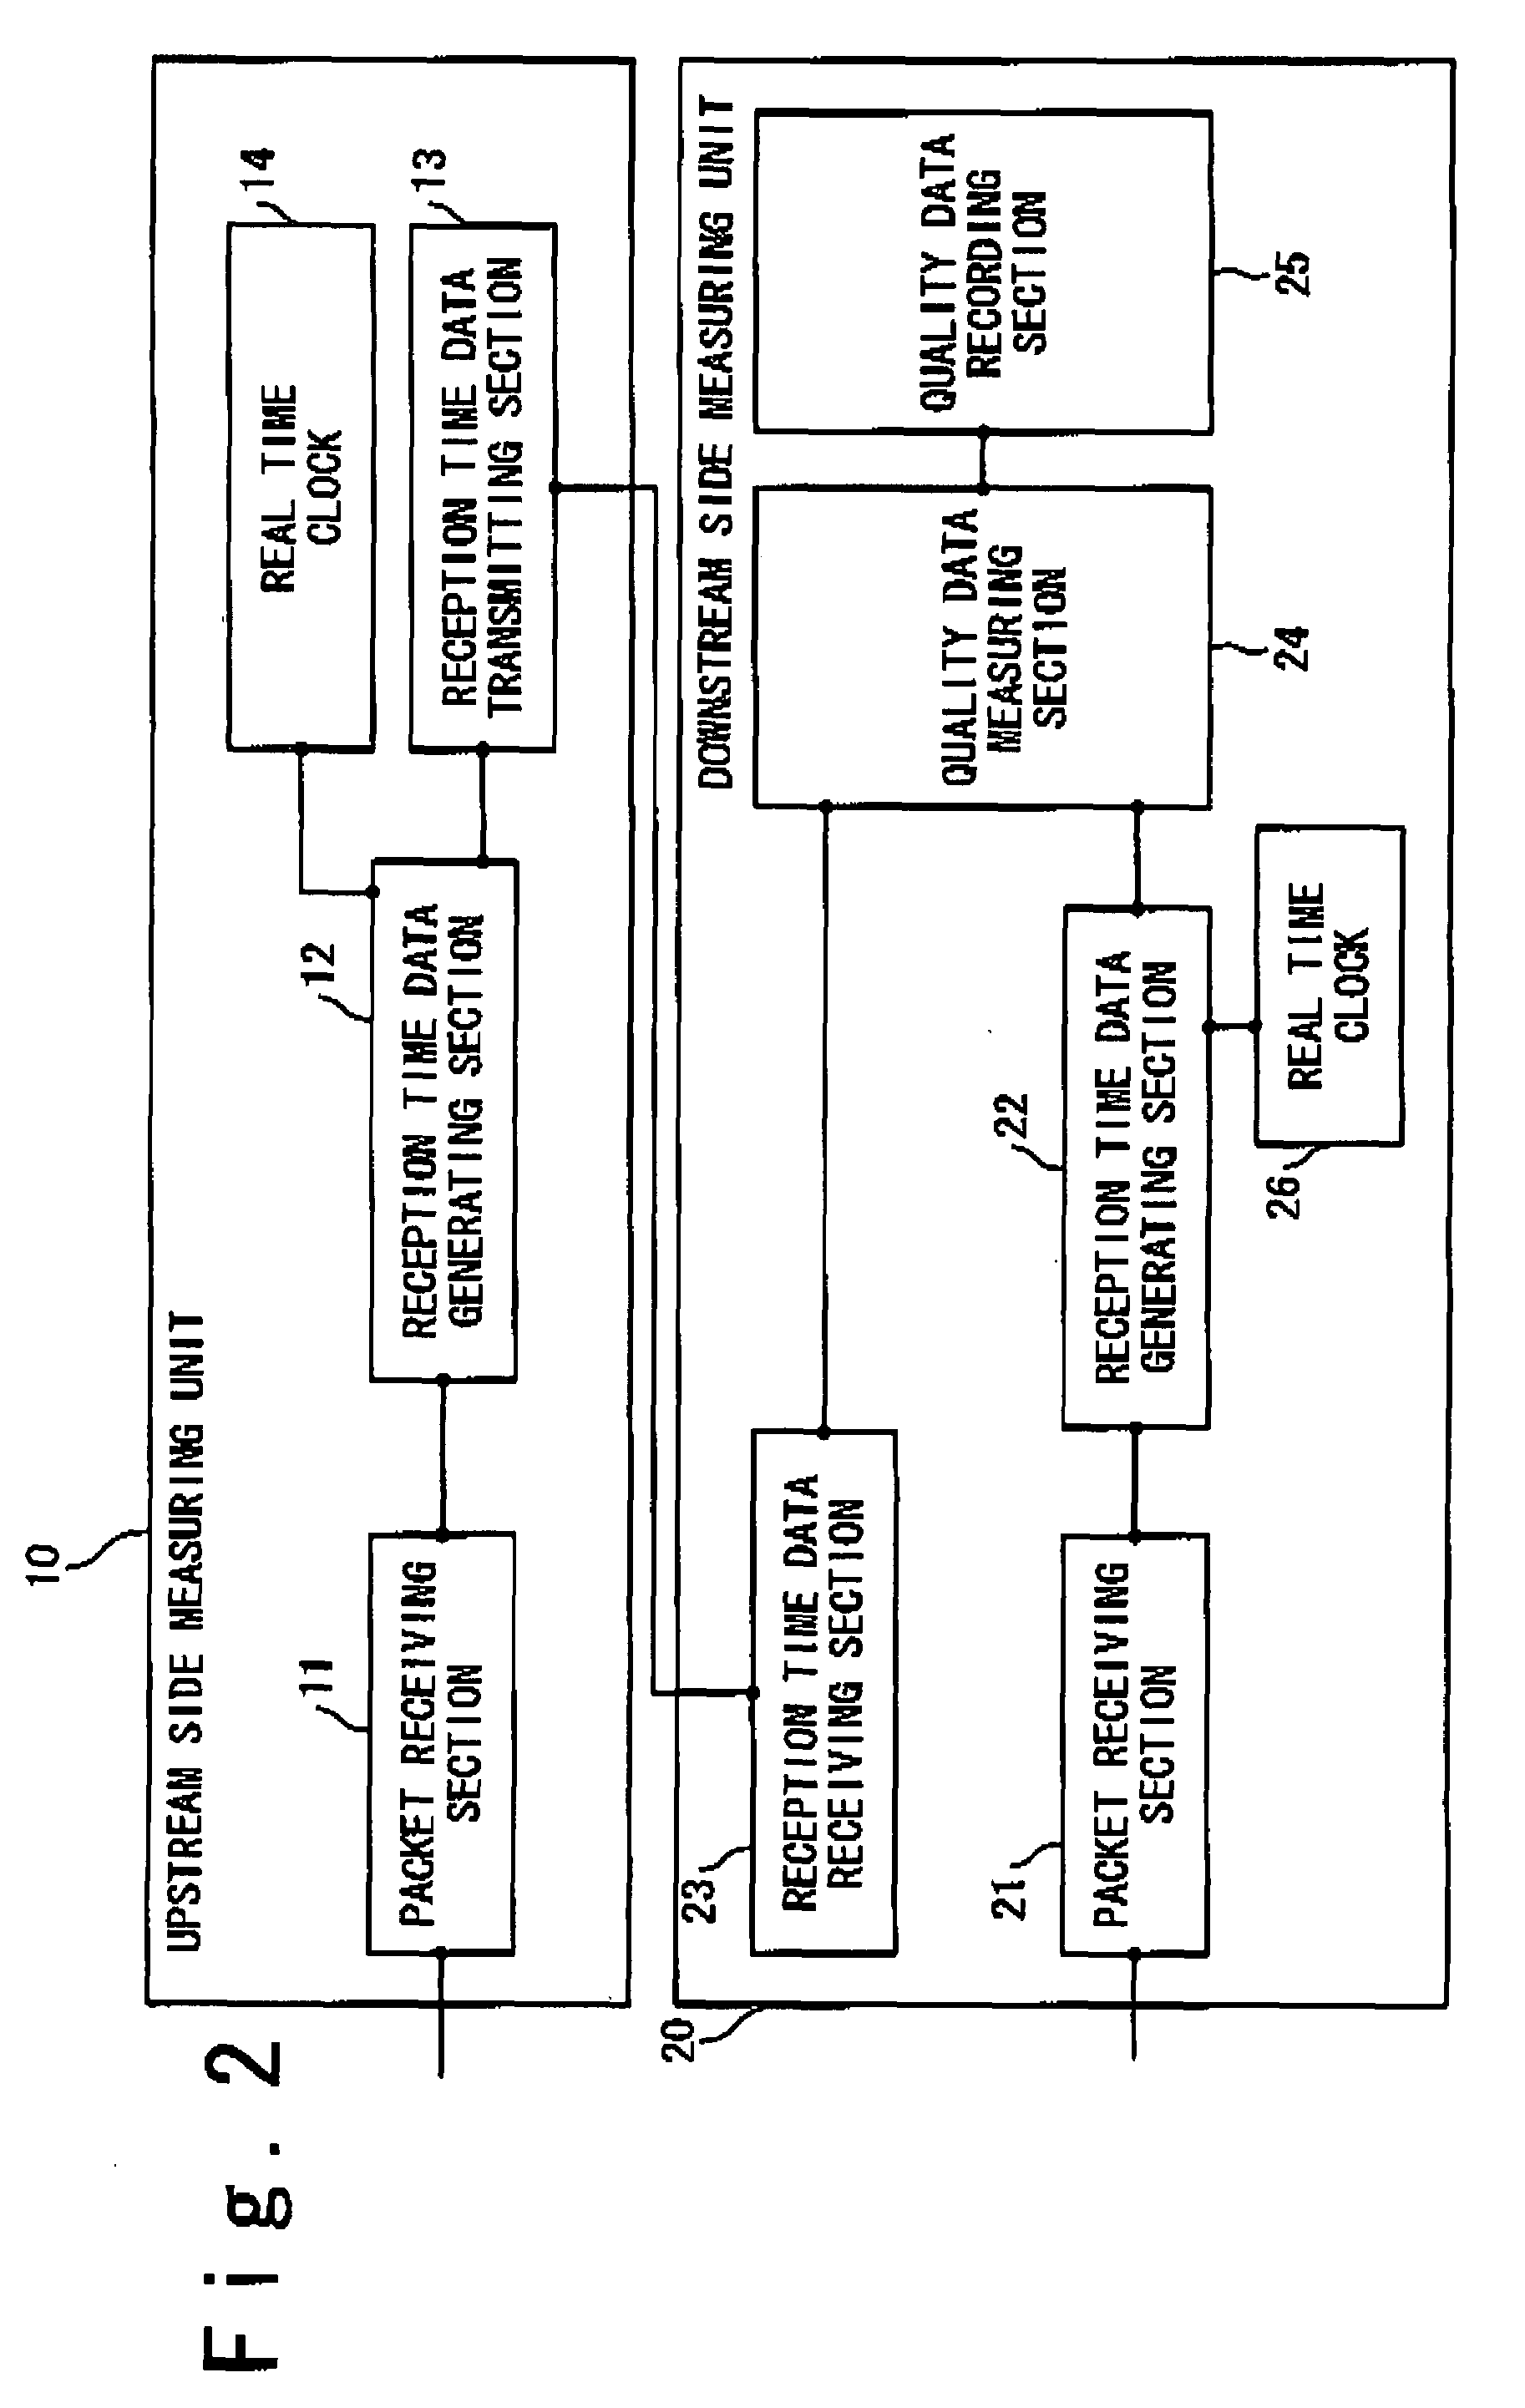 System and method for measuring distribution quality of video image